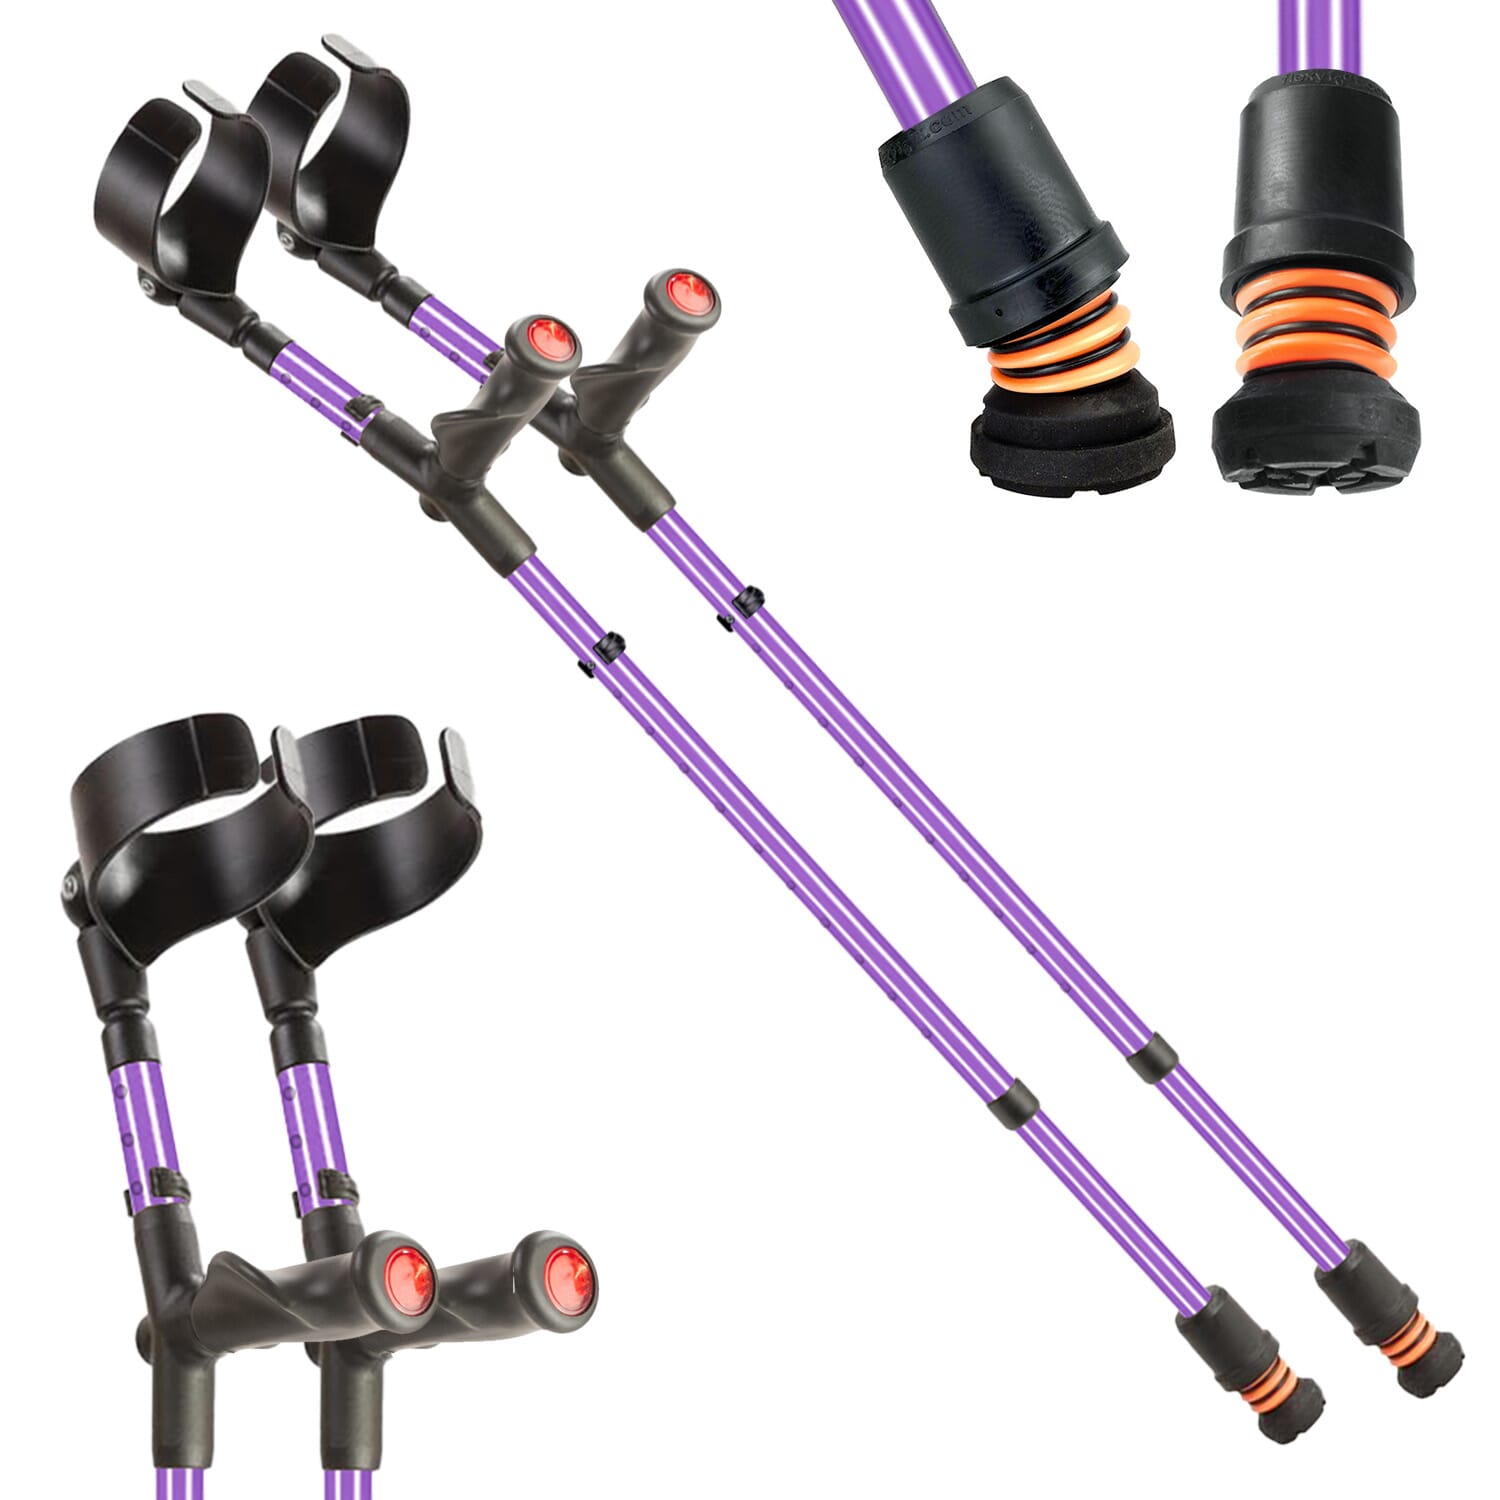 View Flexyfoot Comfort Grip Double Adjustable Crutches Lilac Pair information